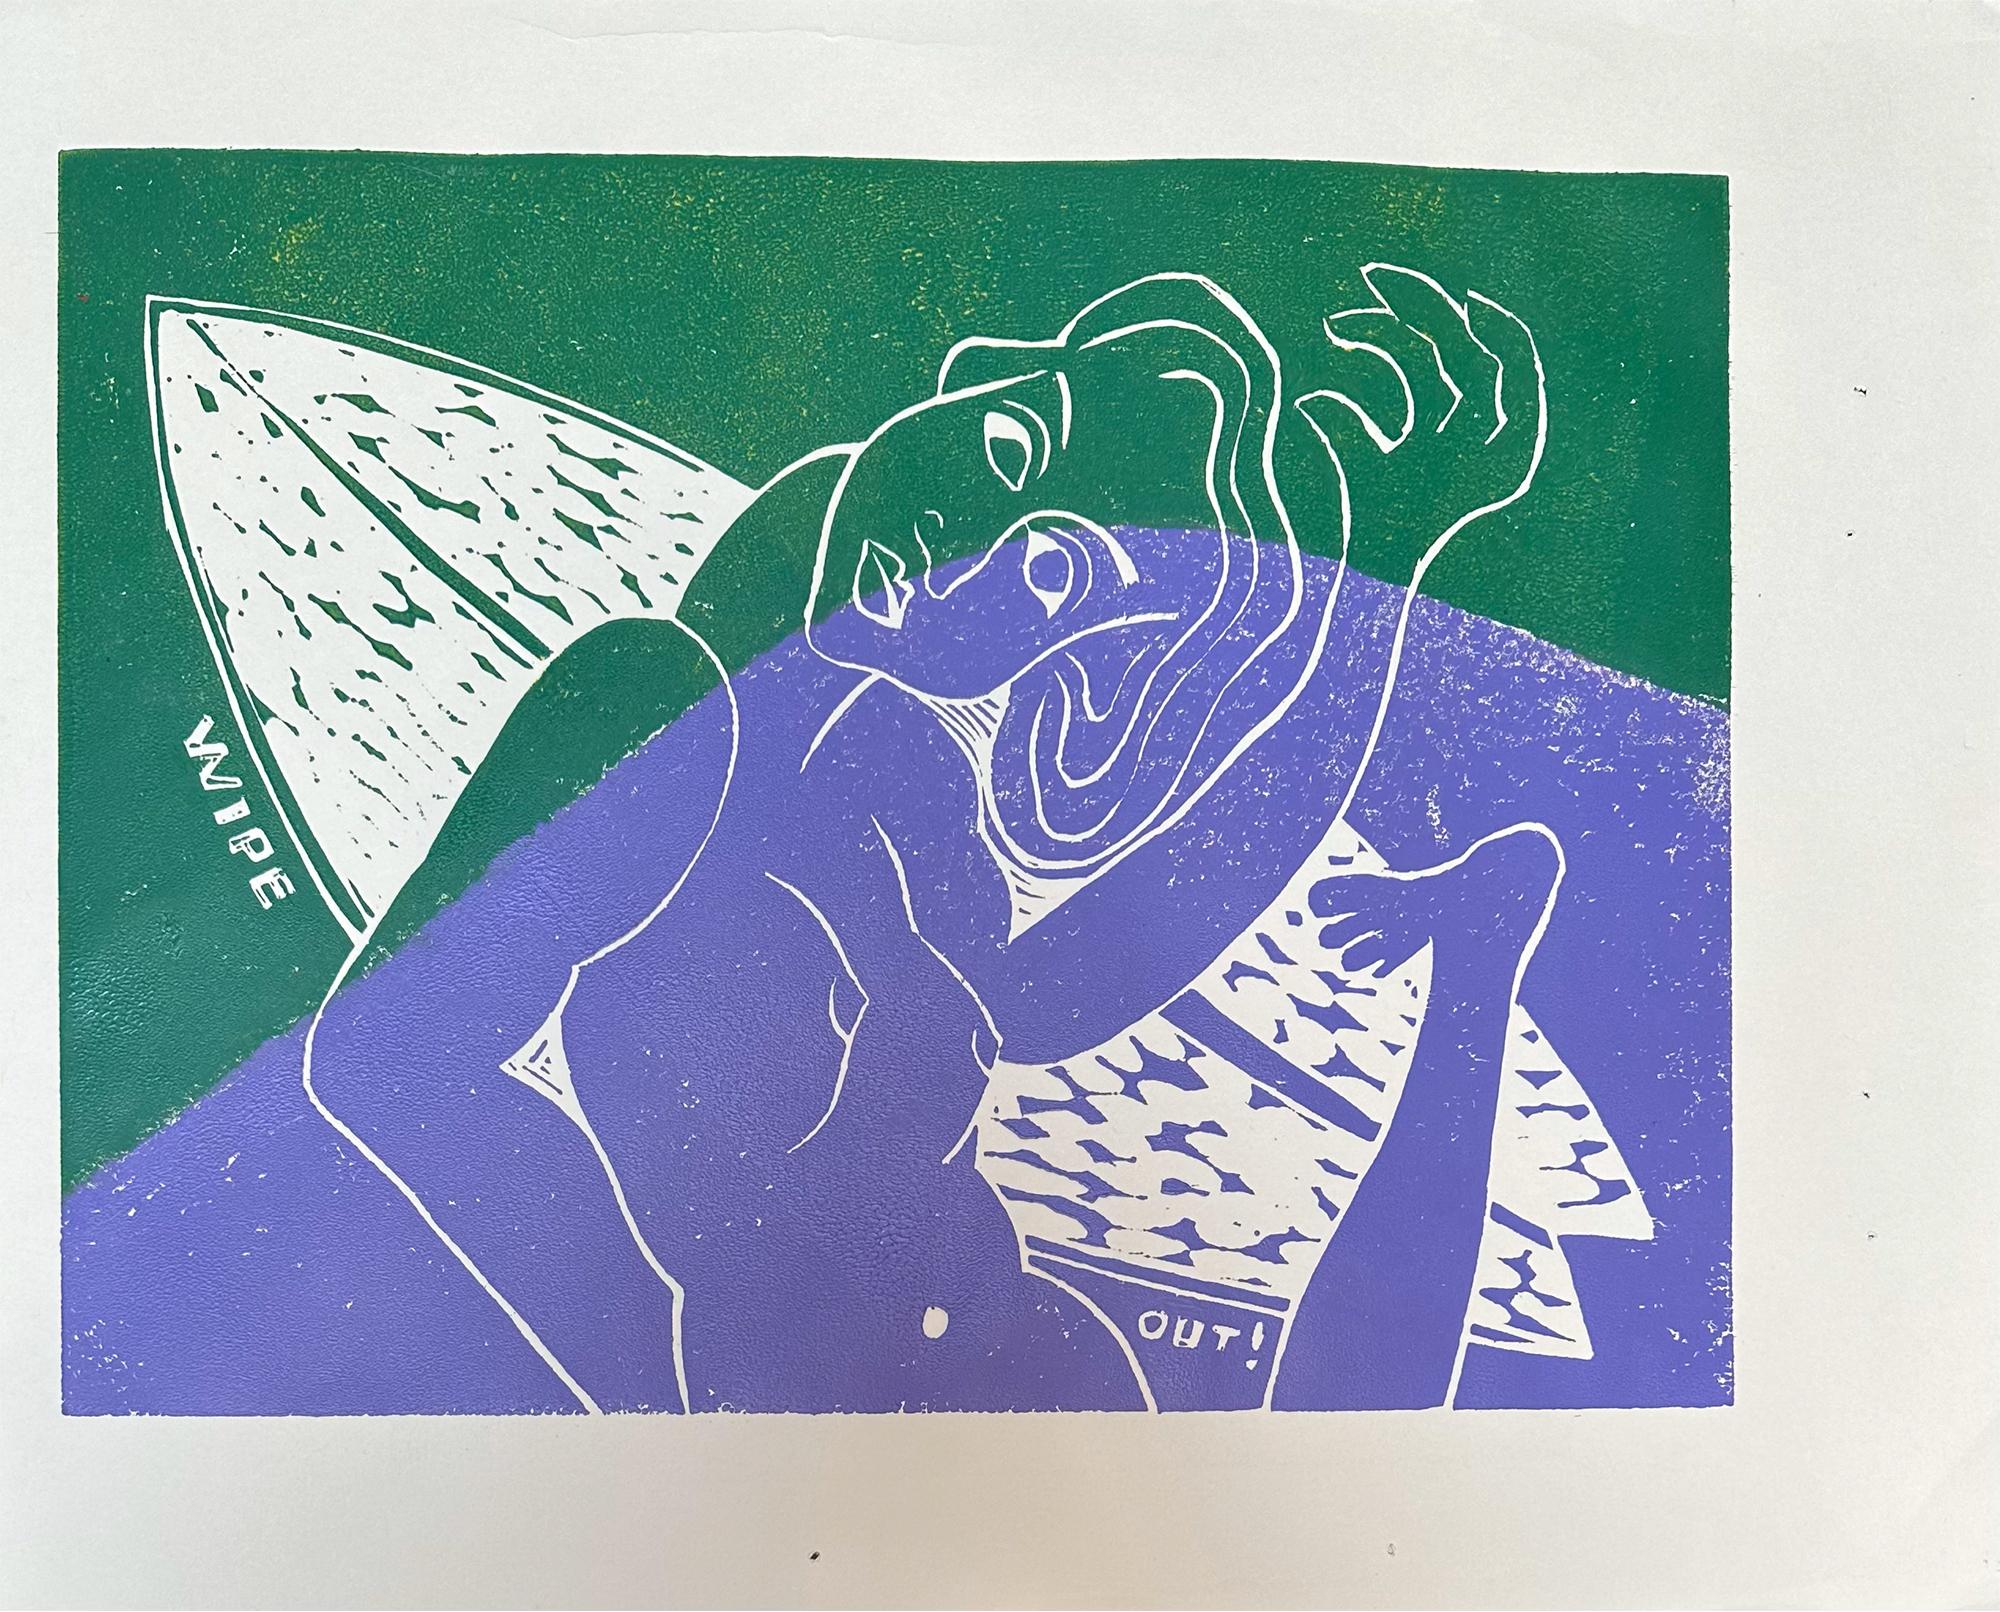 Wipe Out - Surfing Art - Figurative - Woodcut Print By Marc Zimmerman

Limited Edition 01/04

This masterwork is exhibited in the Zimmerman Gallery, Carmel CA.

Immerse yourself in the captivating world of surfing and ocean vibes with Marc